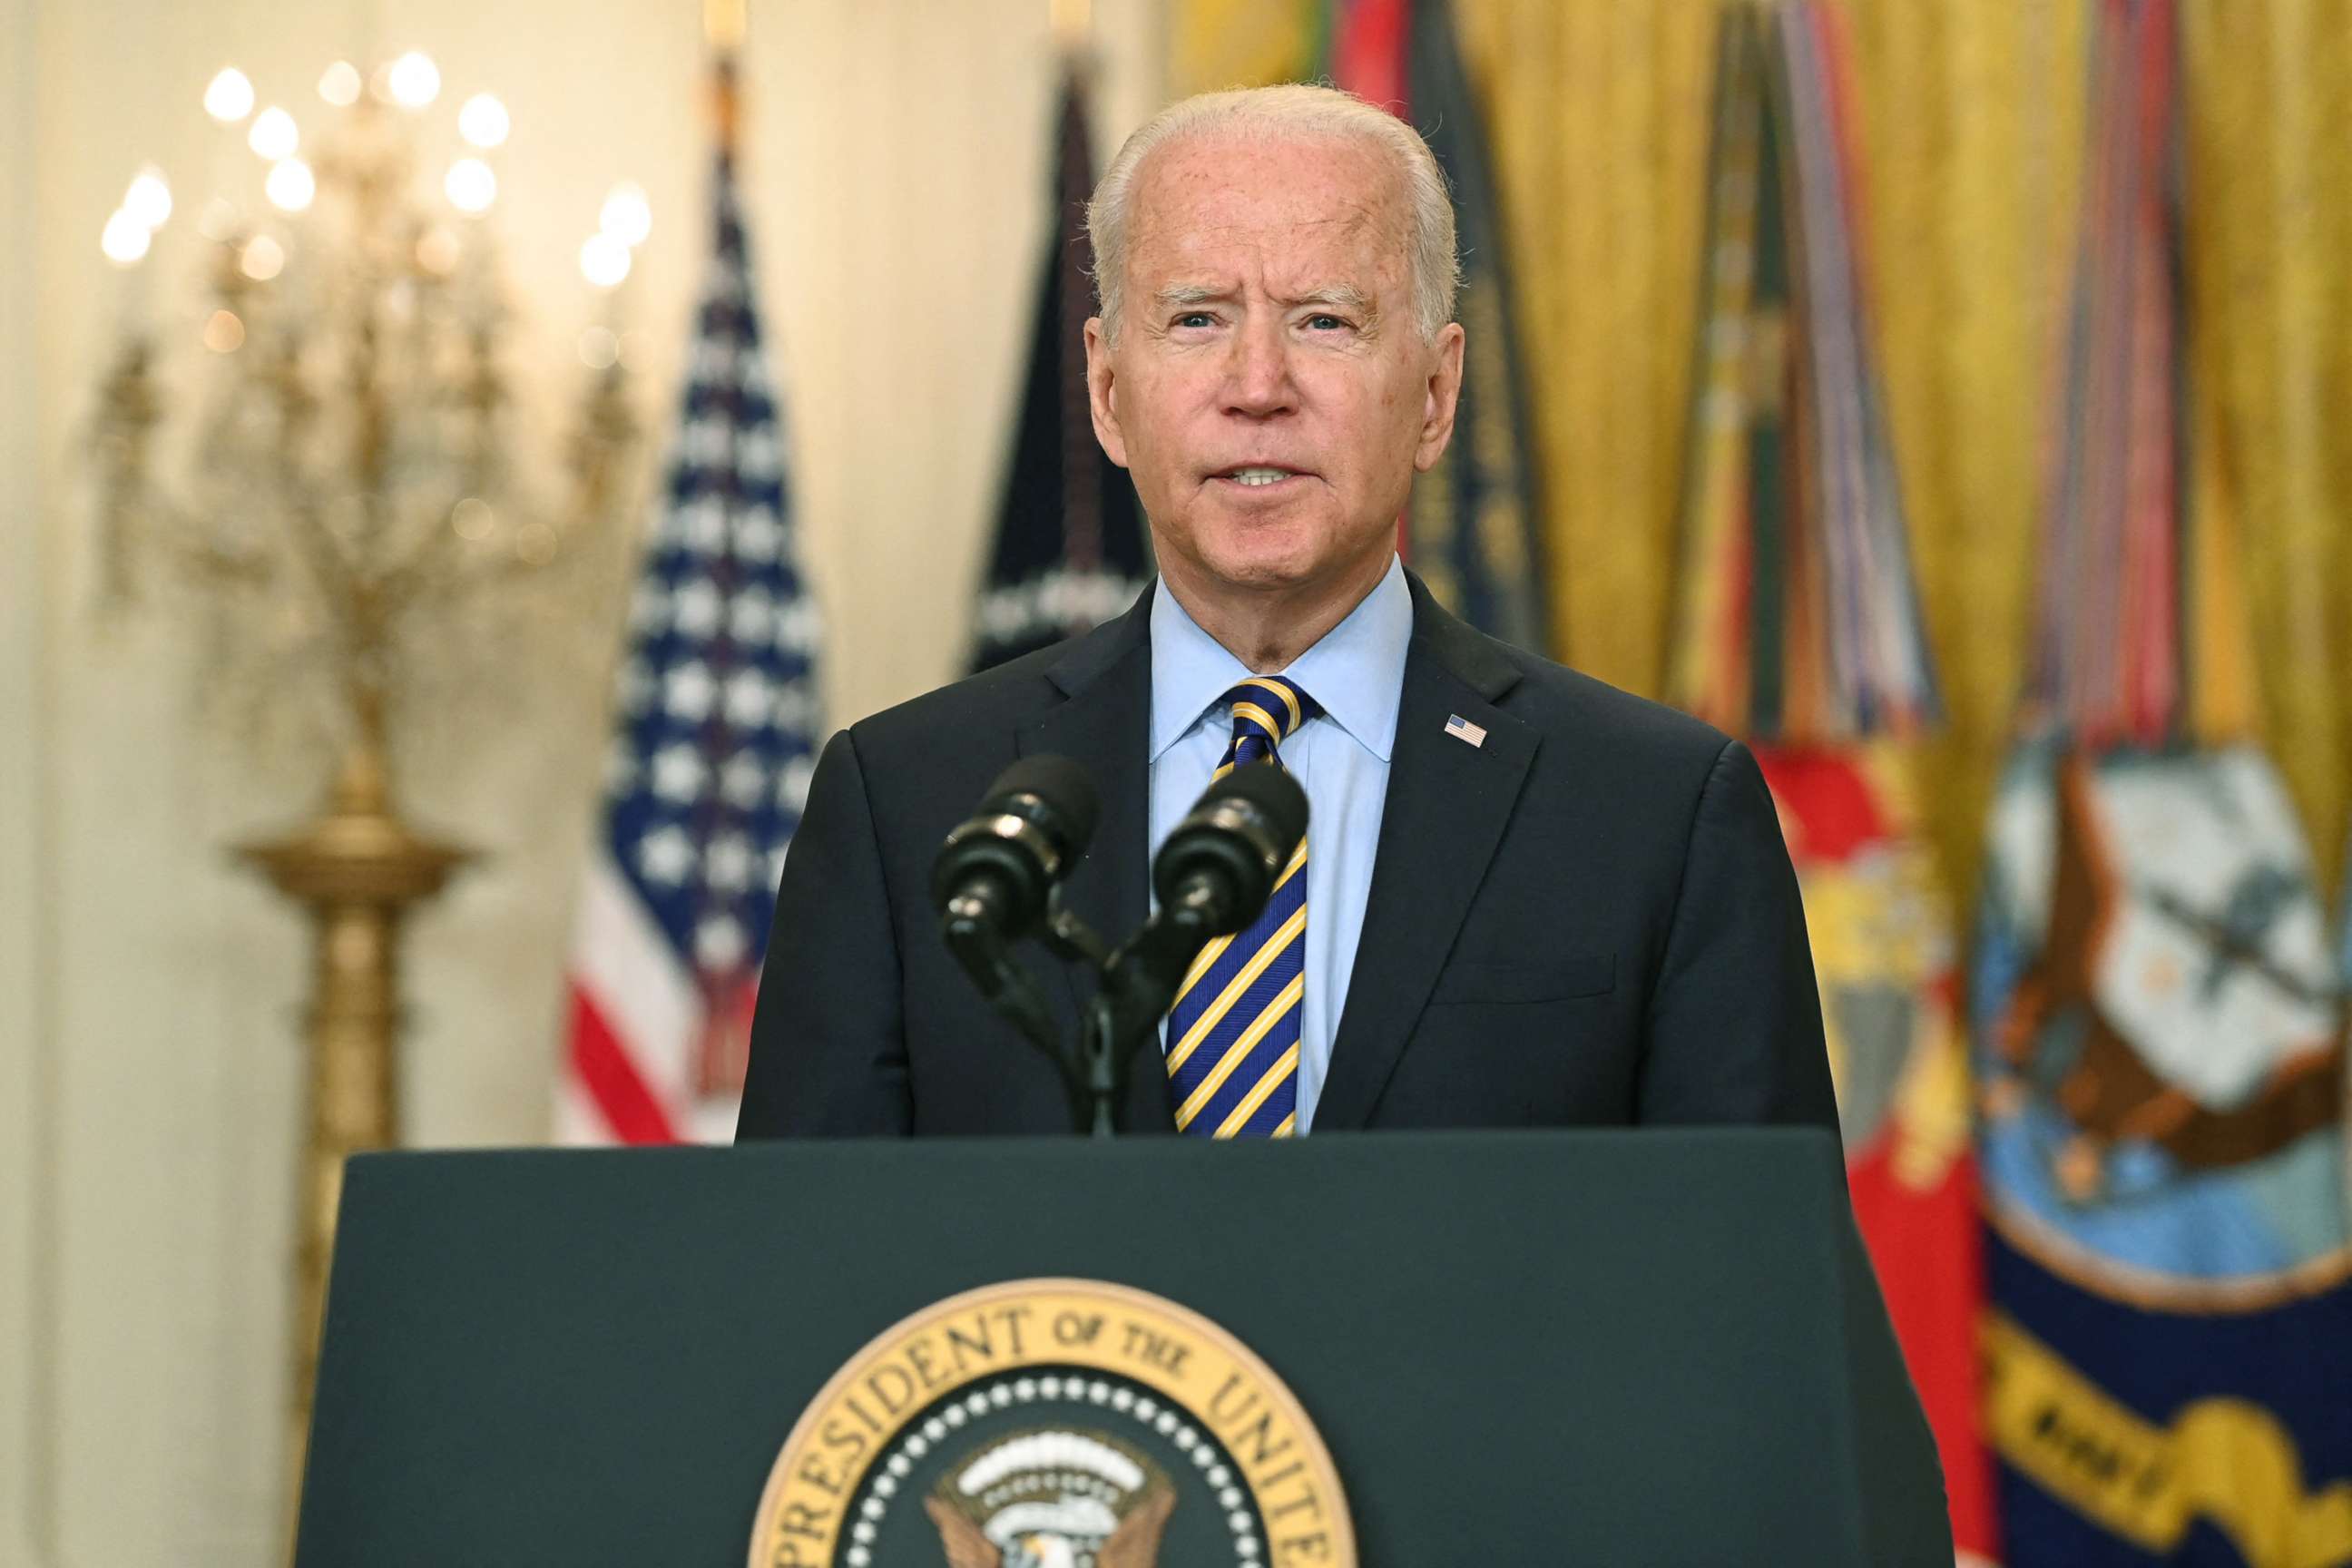 PHOTO: President Joe Biden speaks about the situation in Afghanistan from the East Room of the White House, July 8, 2021.